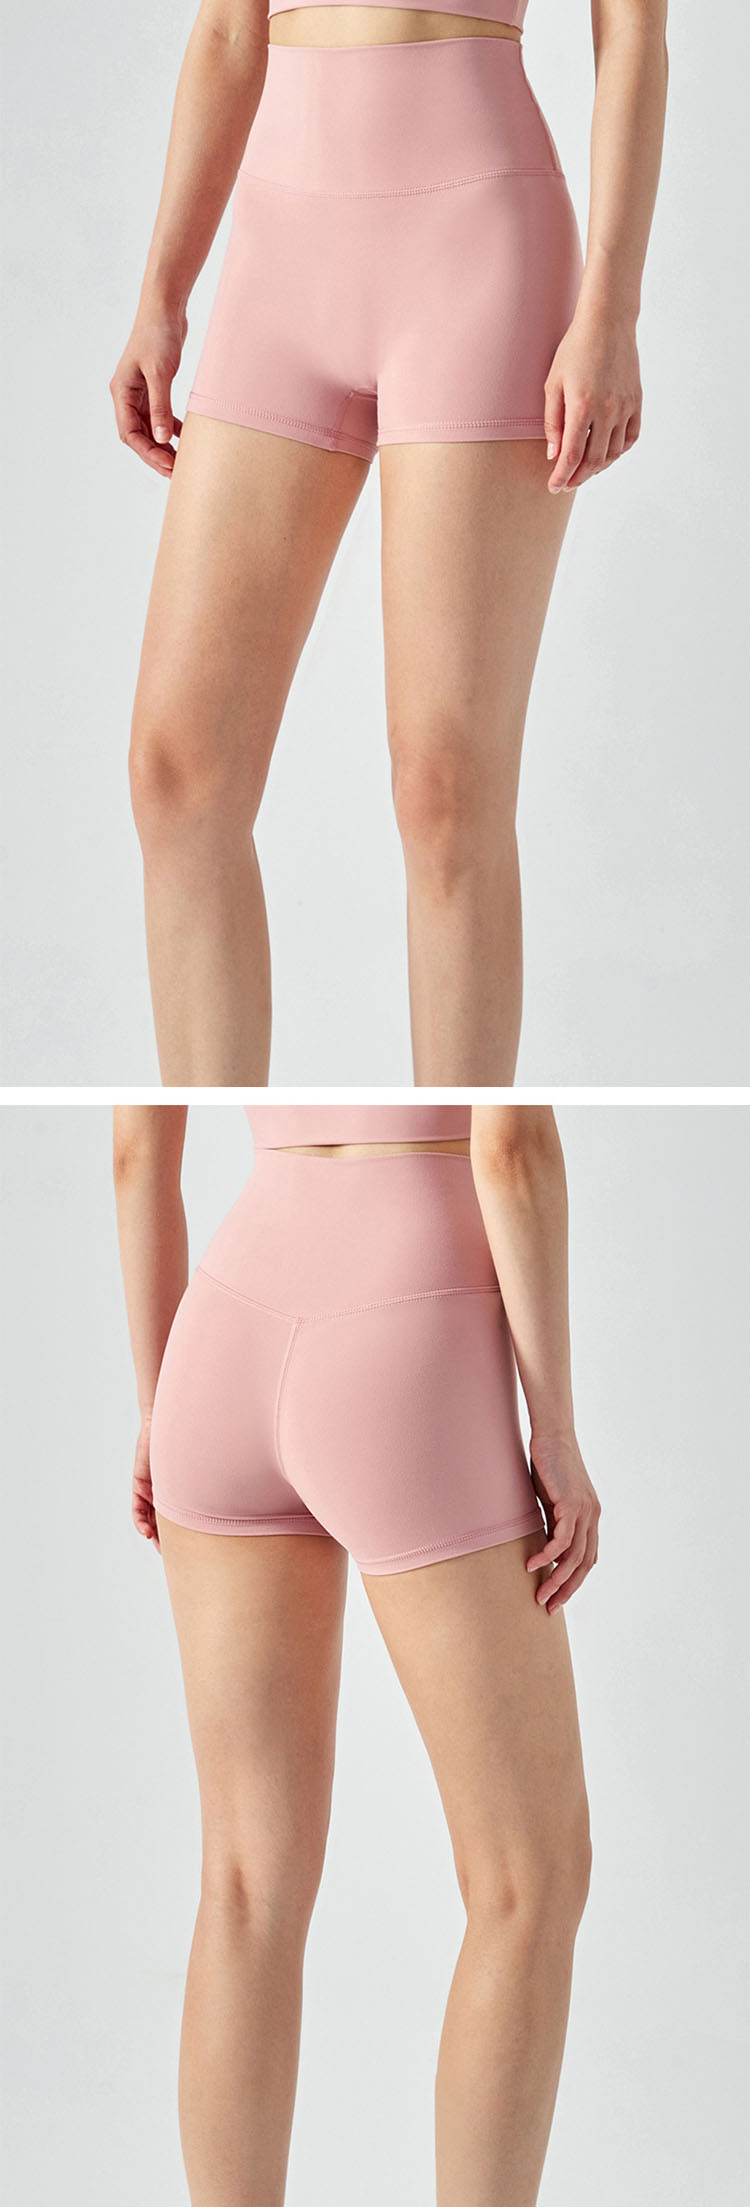 The high waist design makes the abdomen slim and fits comfortably